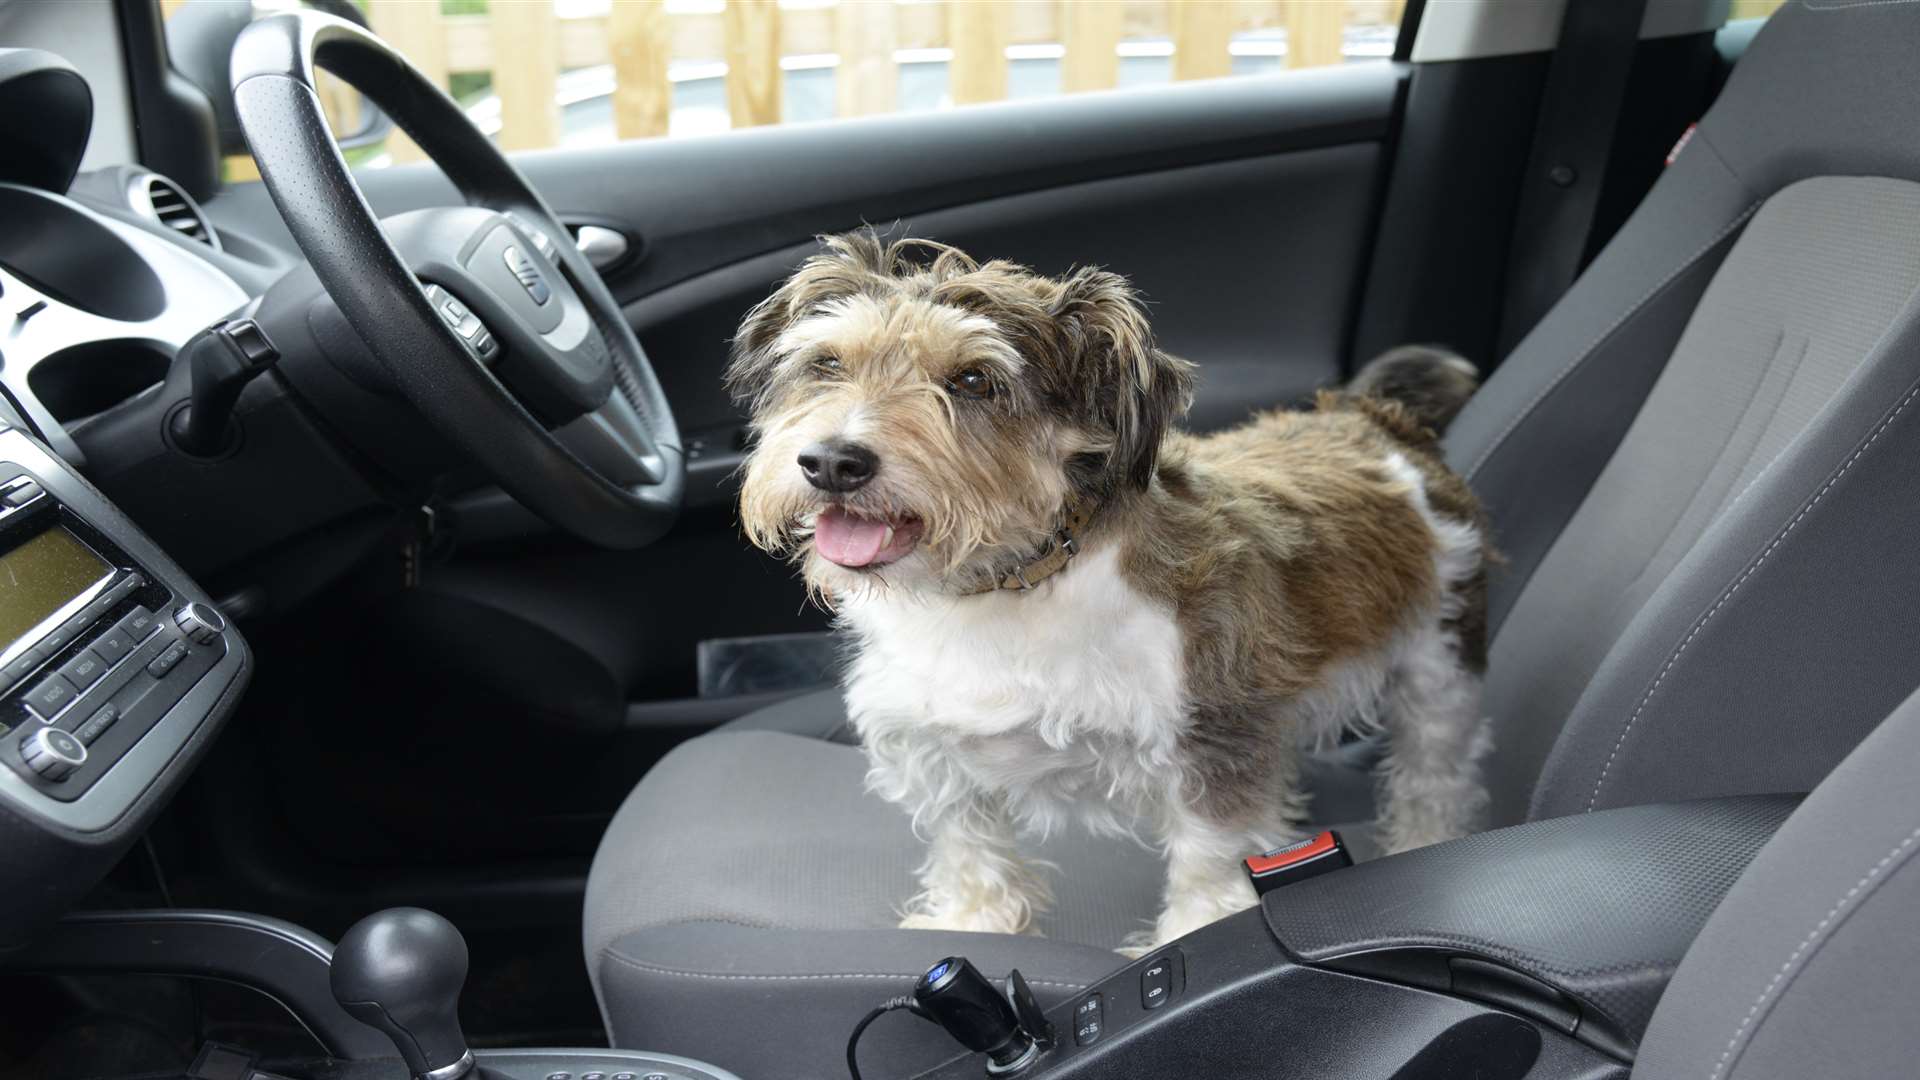 Police are warning owners not to leave their dogs in the car - even for 20 minutes. Stock image